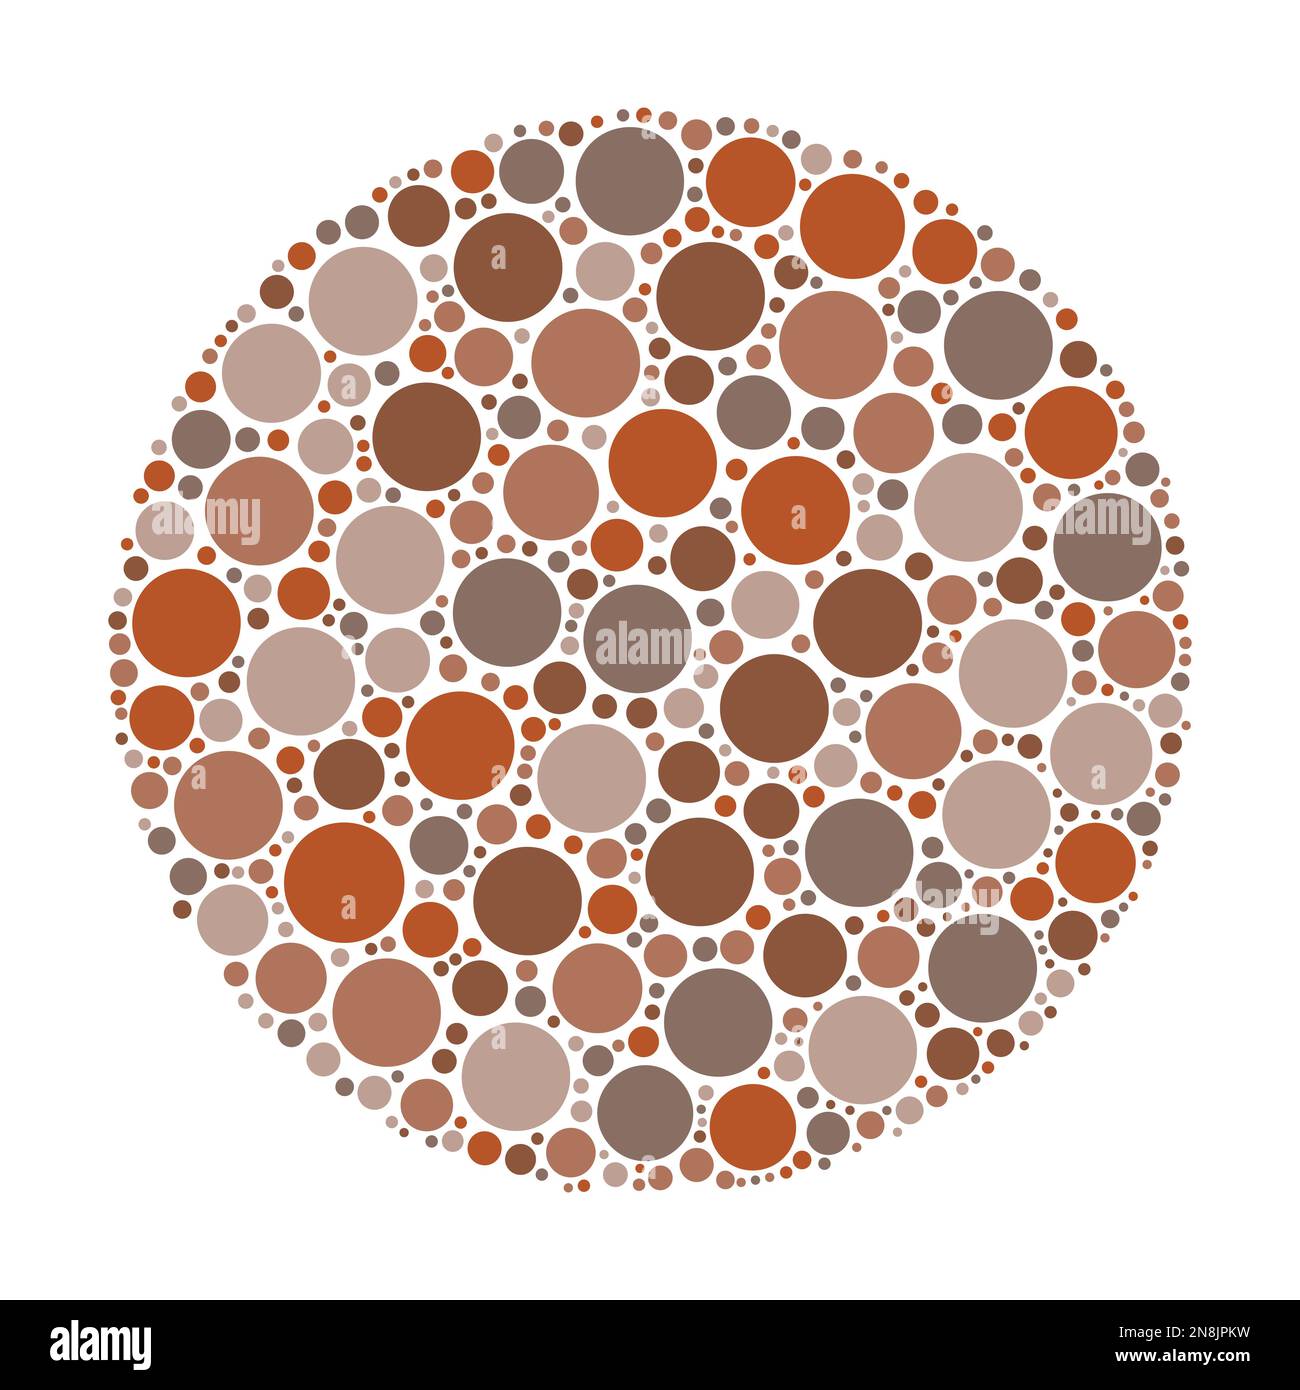 Circle made of dots in shades of brown. Abstract vector illustration inspired by medical Ishirara test for color-blindness. Stock Vector